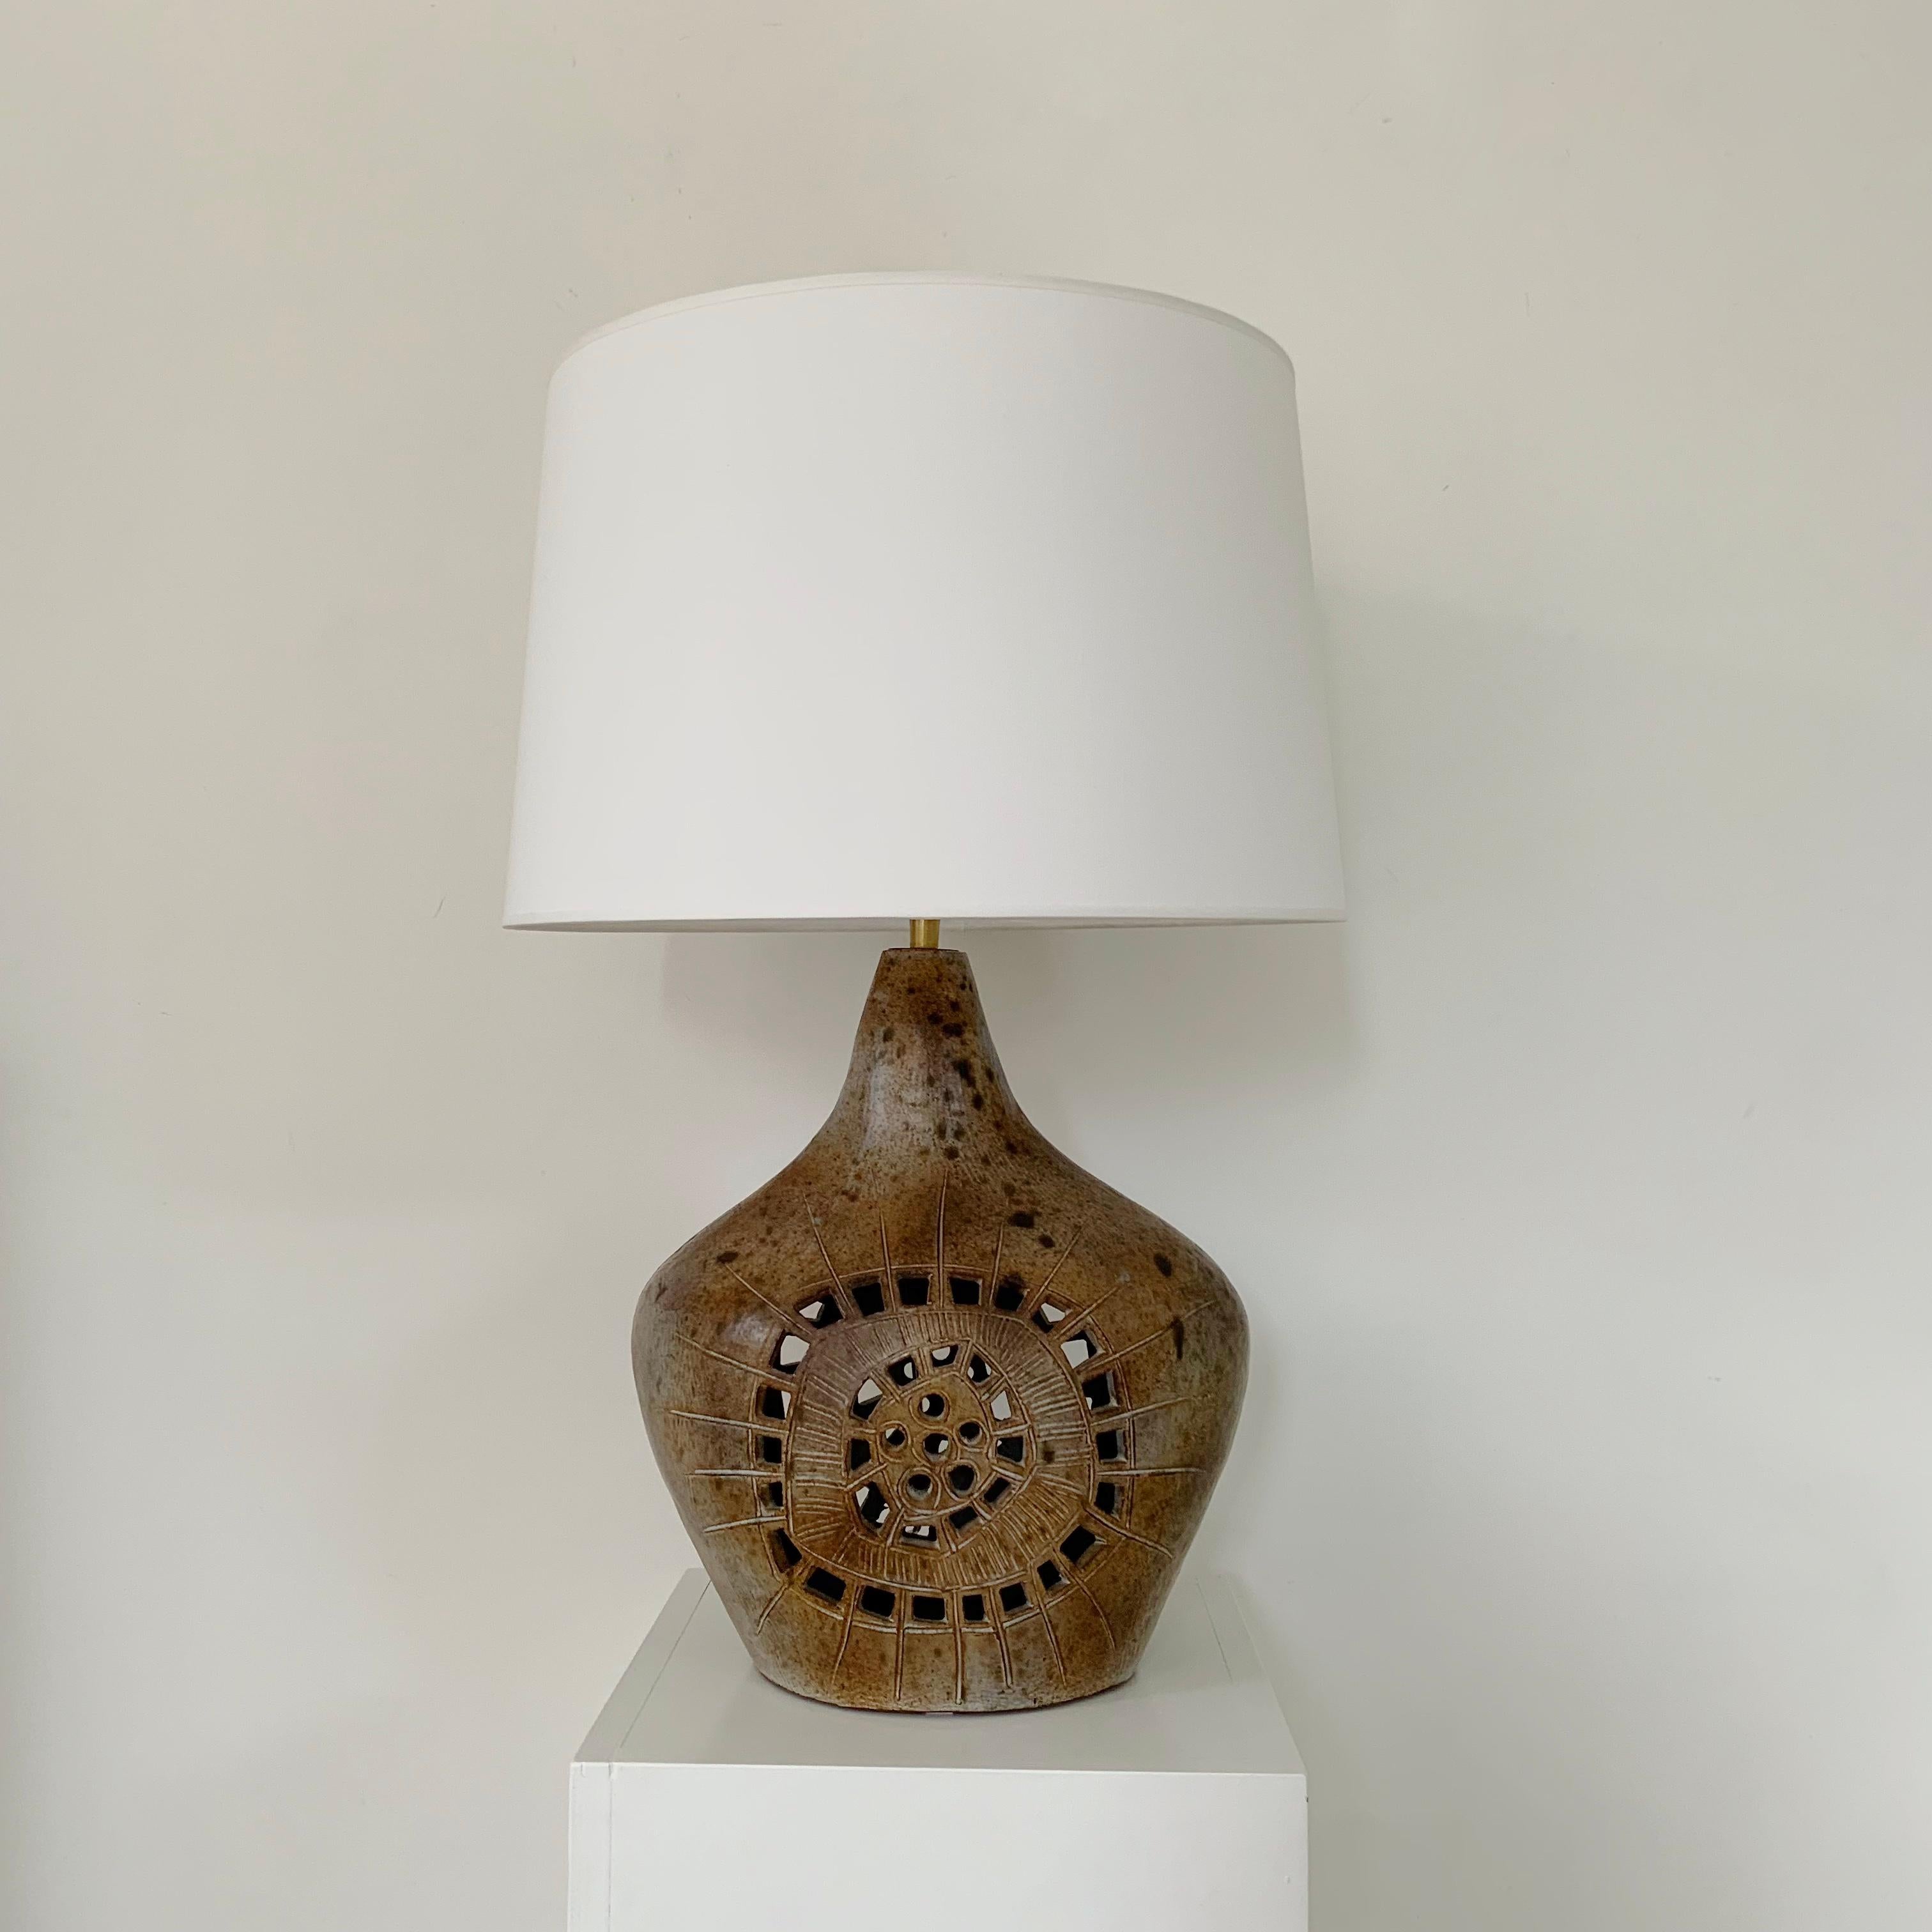 French Mid-Century Ceramic Table Lamp by Agnes Escala, circa 1970, France.